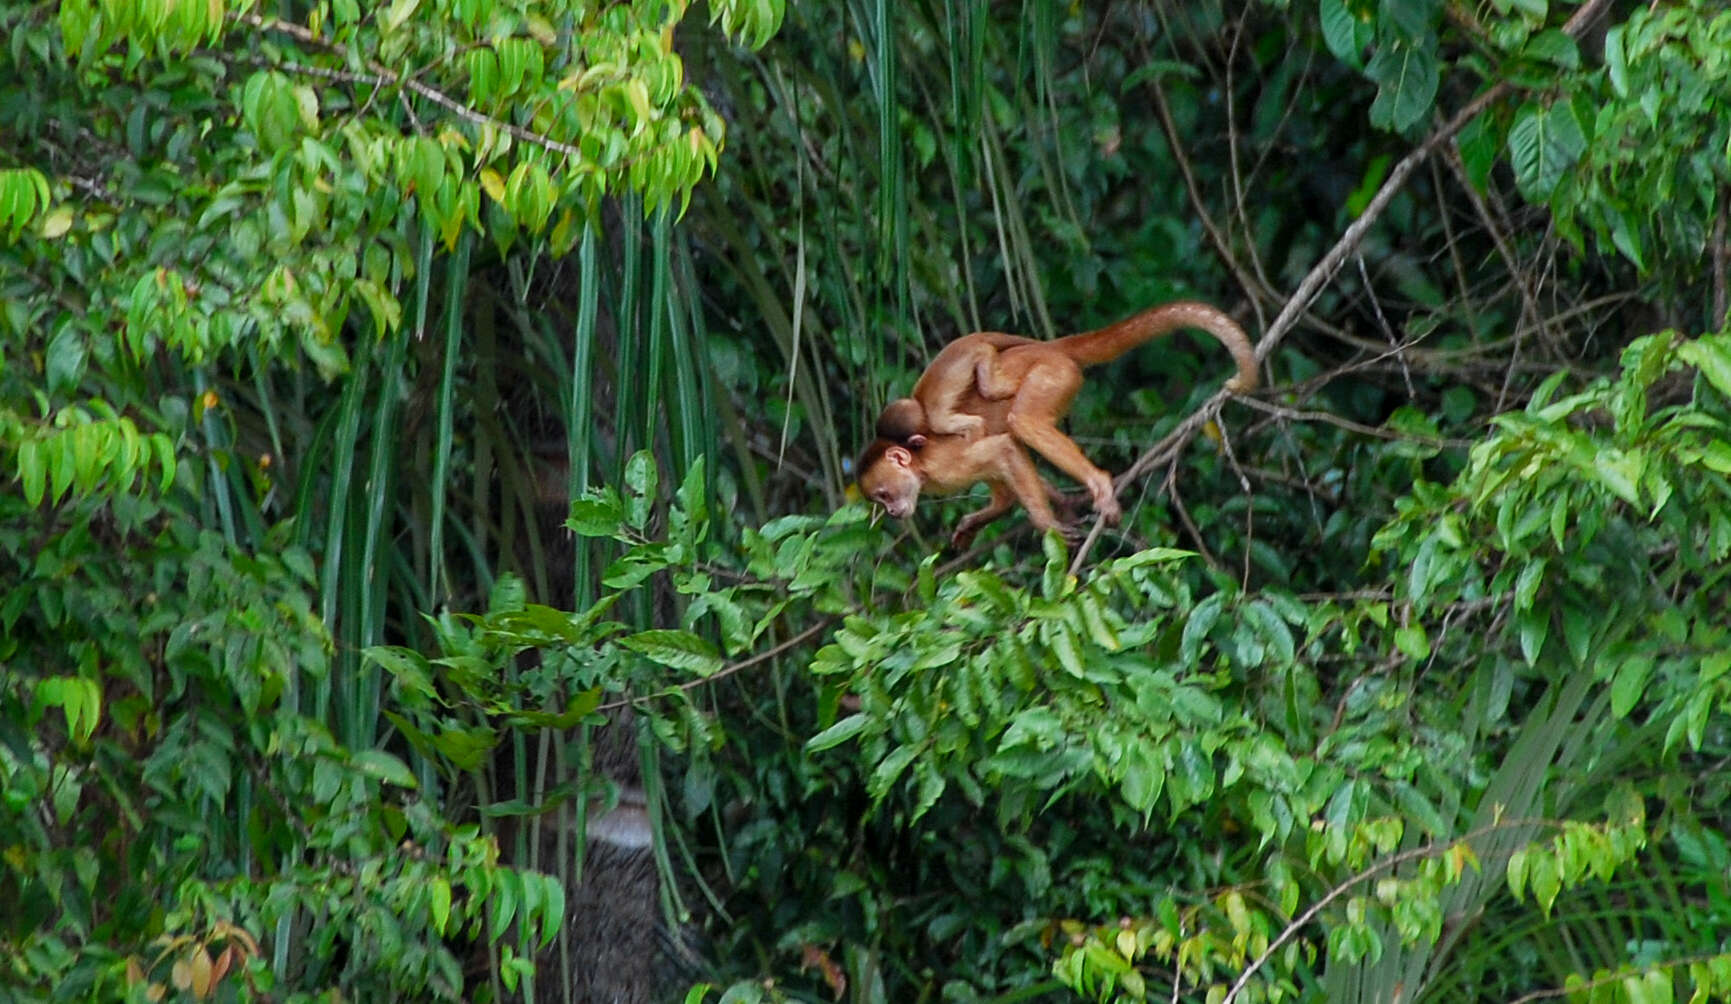 Image of Spix's white-fronted capuchin